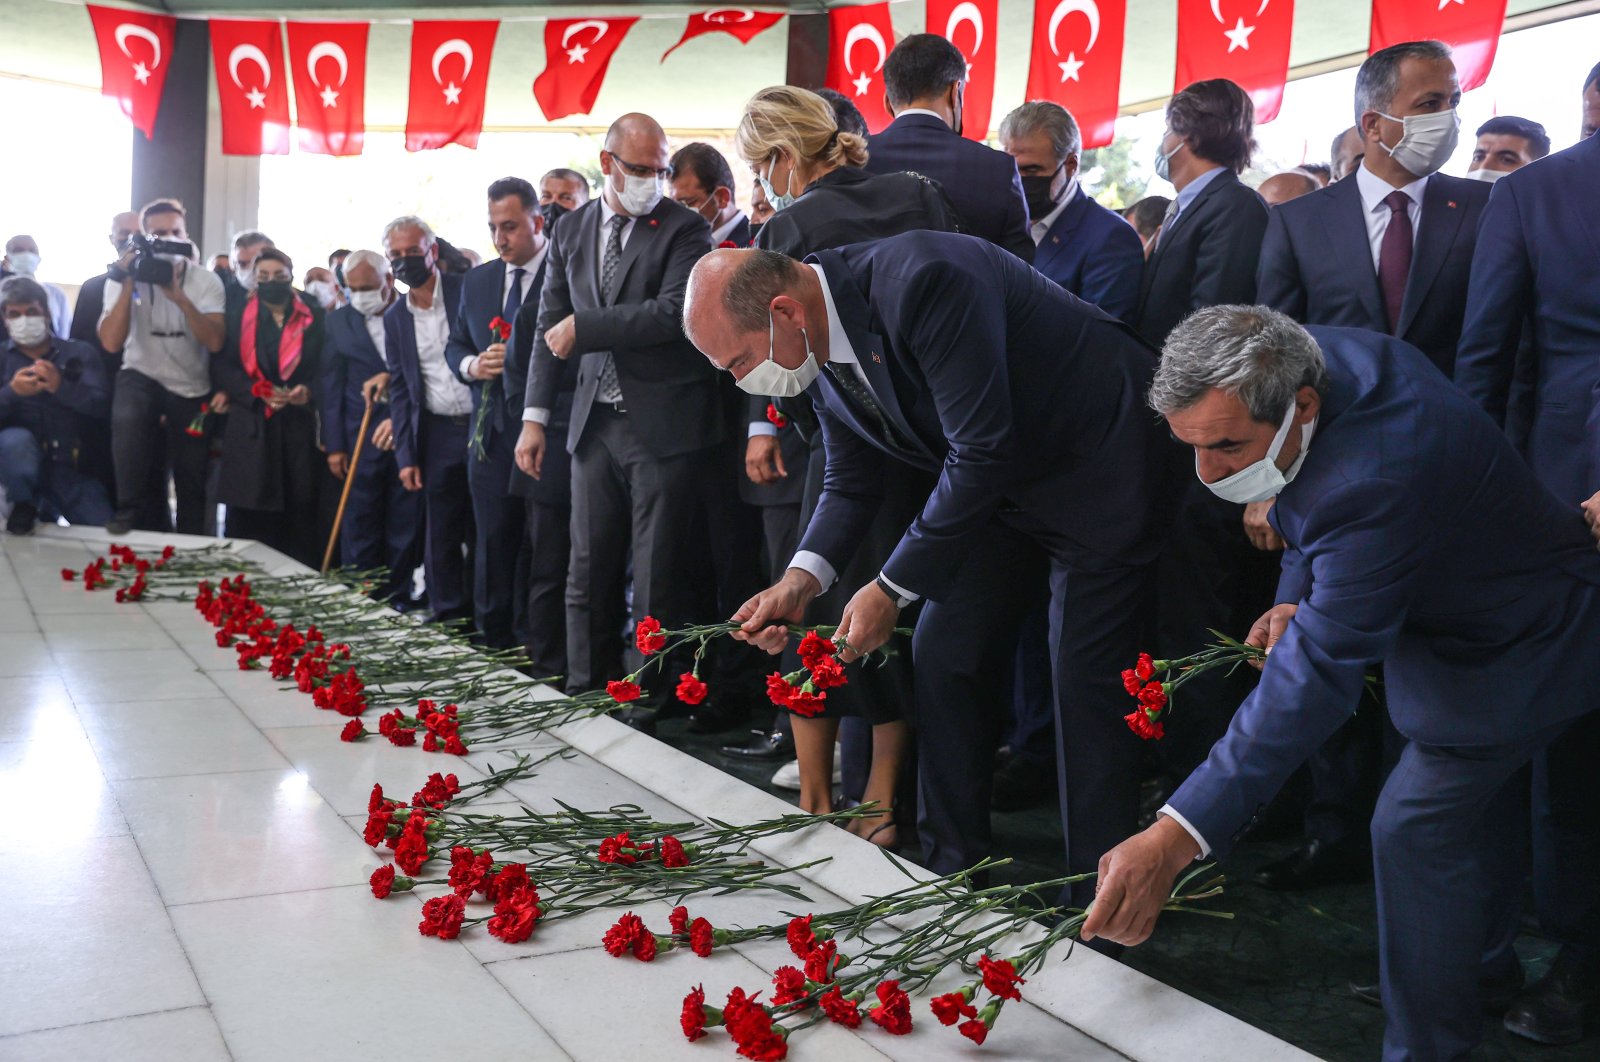 Interior Minister Süleyman Soylu and the visitors leave flowers at the graves of former Prime Minister Adnan Menderes and his two ministers Fatin Rüştü Zorlu and Hasan Polatkan Menderes, who were hanged by putschists, in Istanbul, Turkey, Sept. 17, 2021. (AA PHOTO)